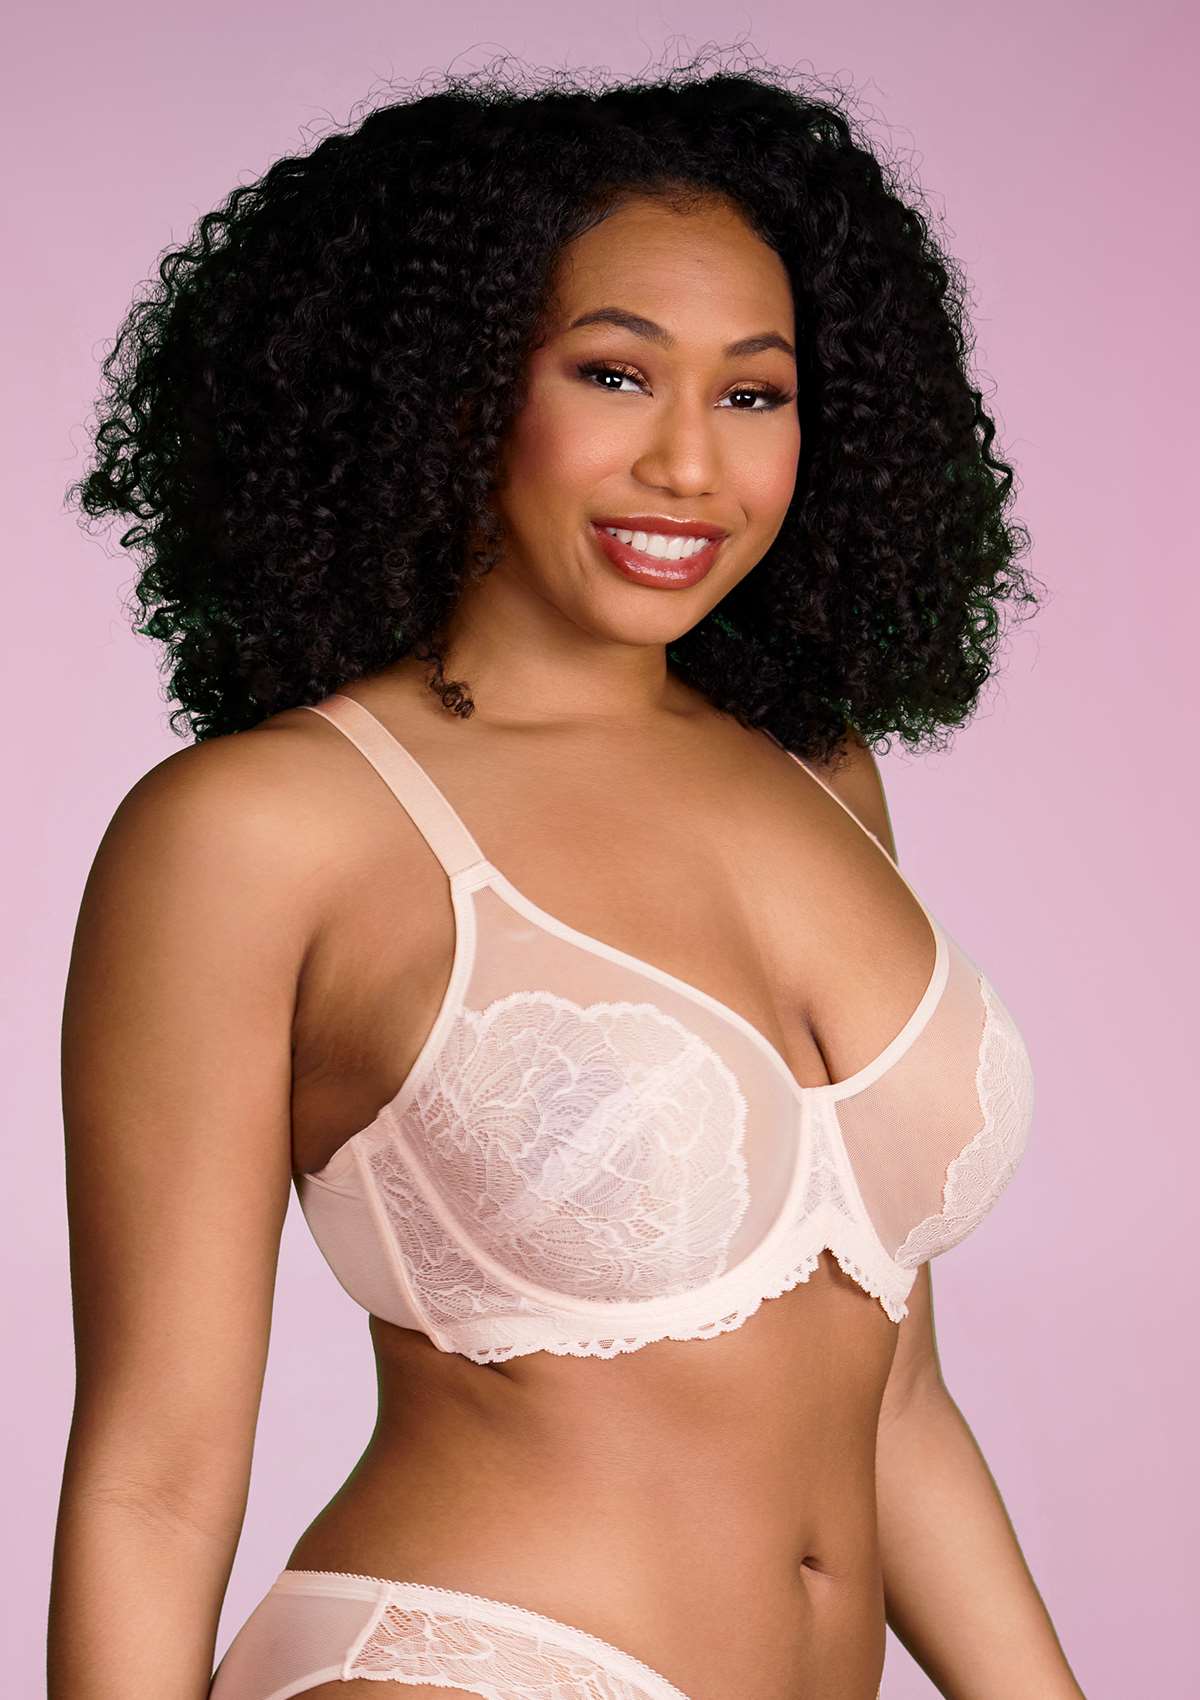 HSIA Blossom Sheer Lace Bra: Comfortable Underwire Bra For Big Busts - White / 36 / DDD/F